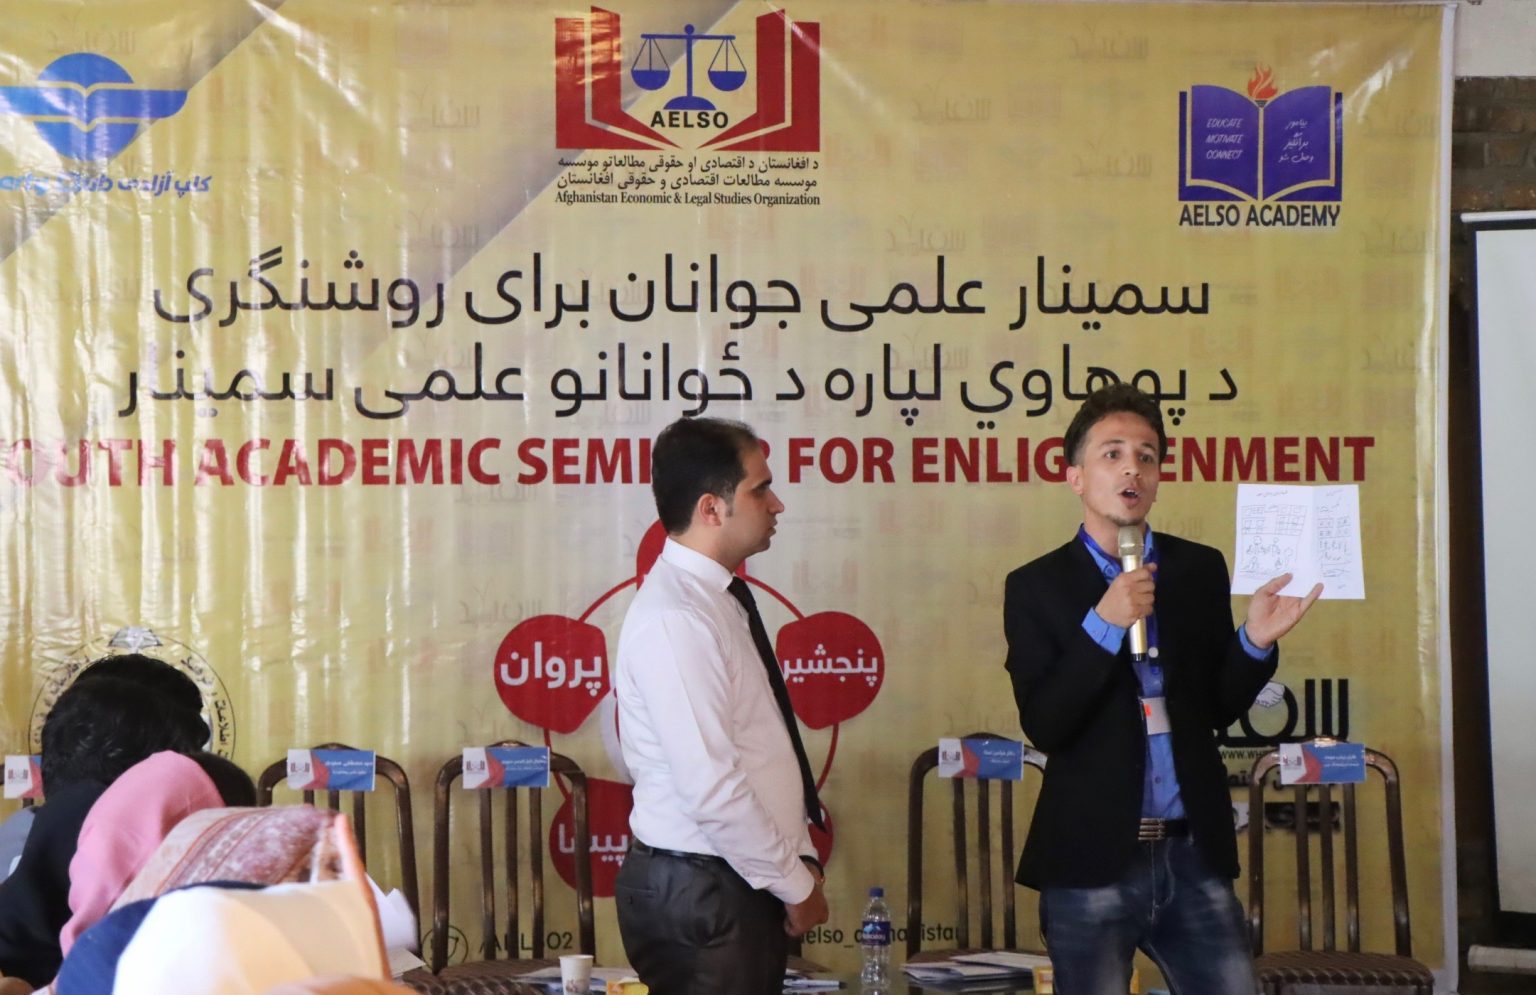 Mr. Mohammad Kamal, one of the participants in this academic seminar